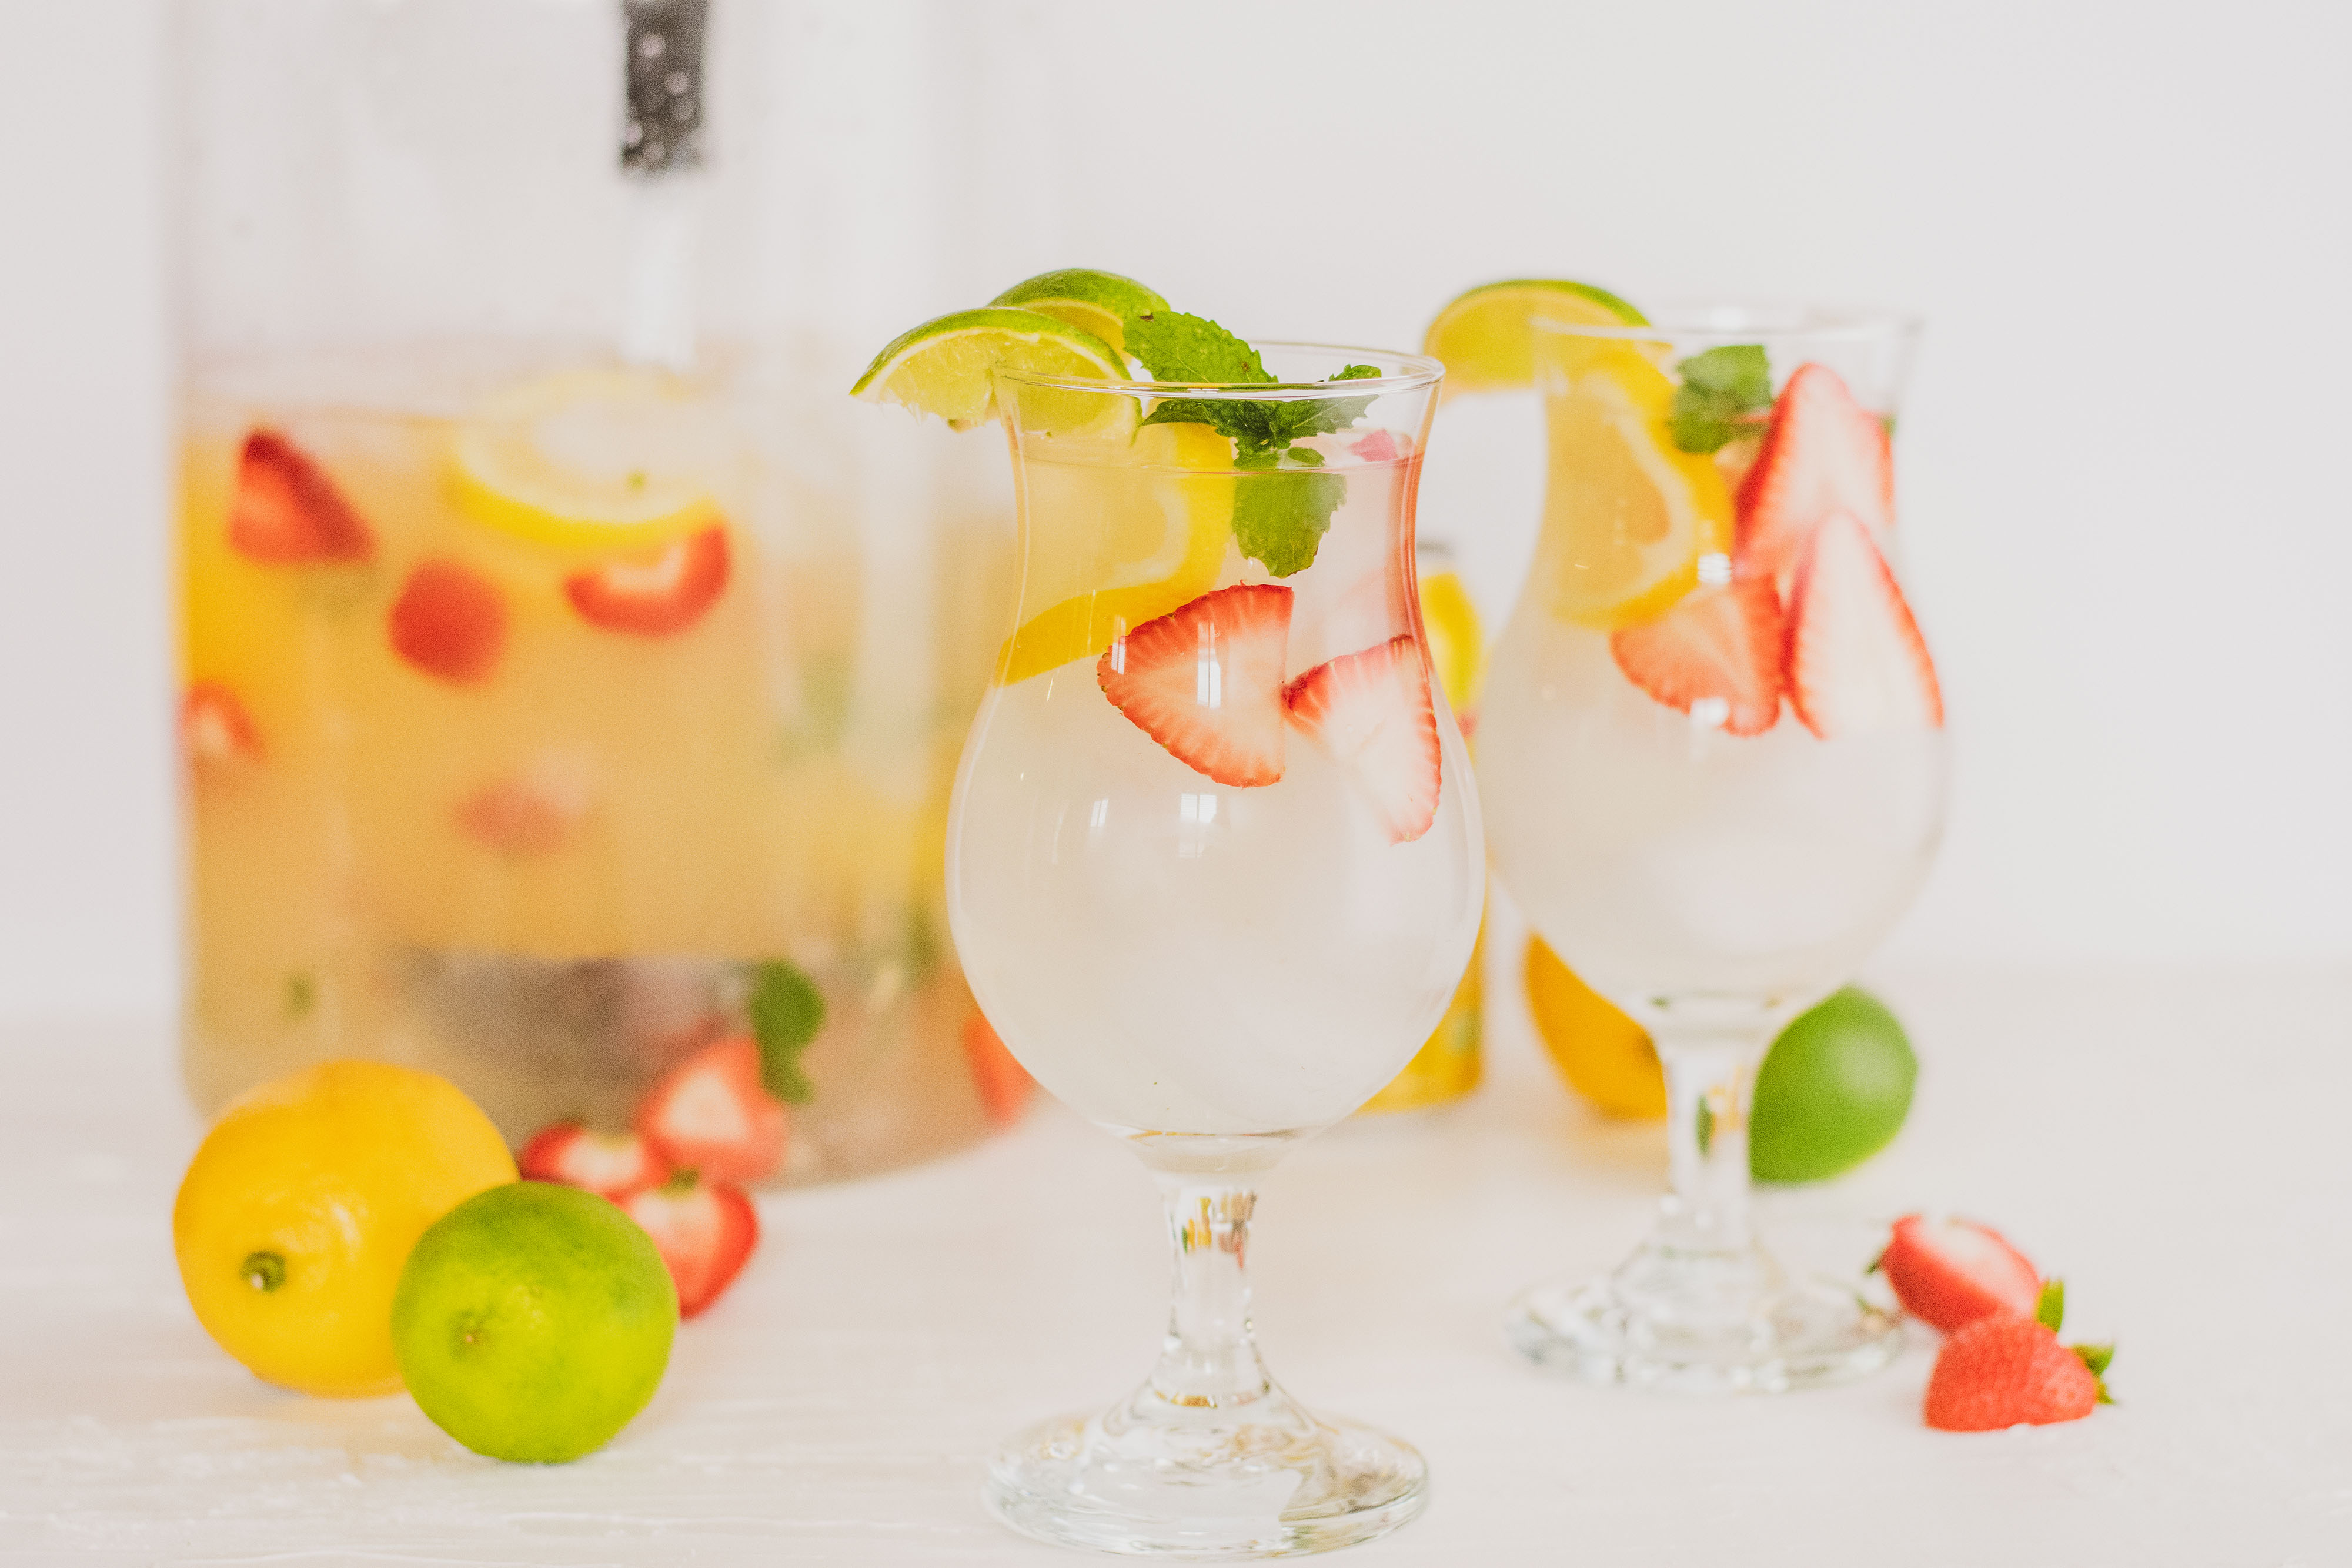 Two glasses with low carb strawberry lemonade mojito drink. With sliced strawberries and lemons and mint leaves on a white surface.